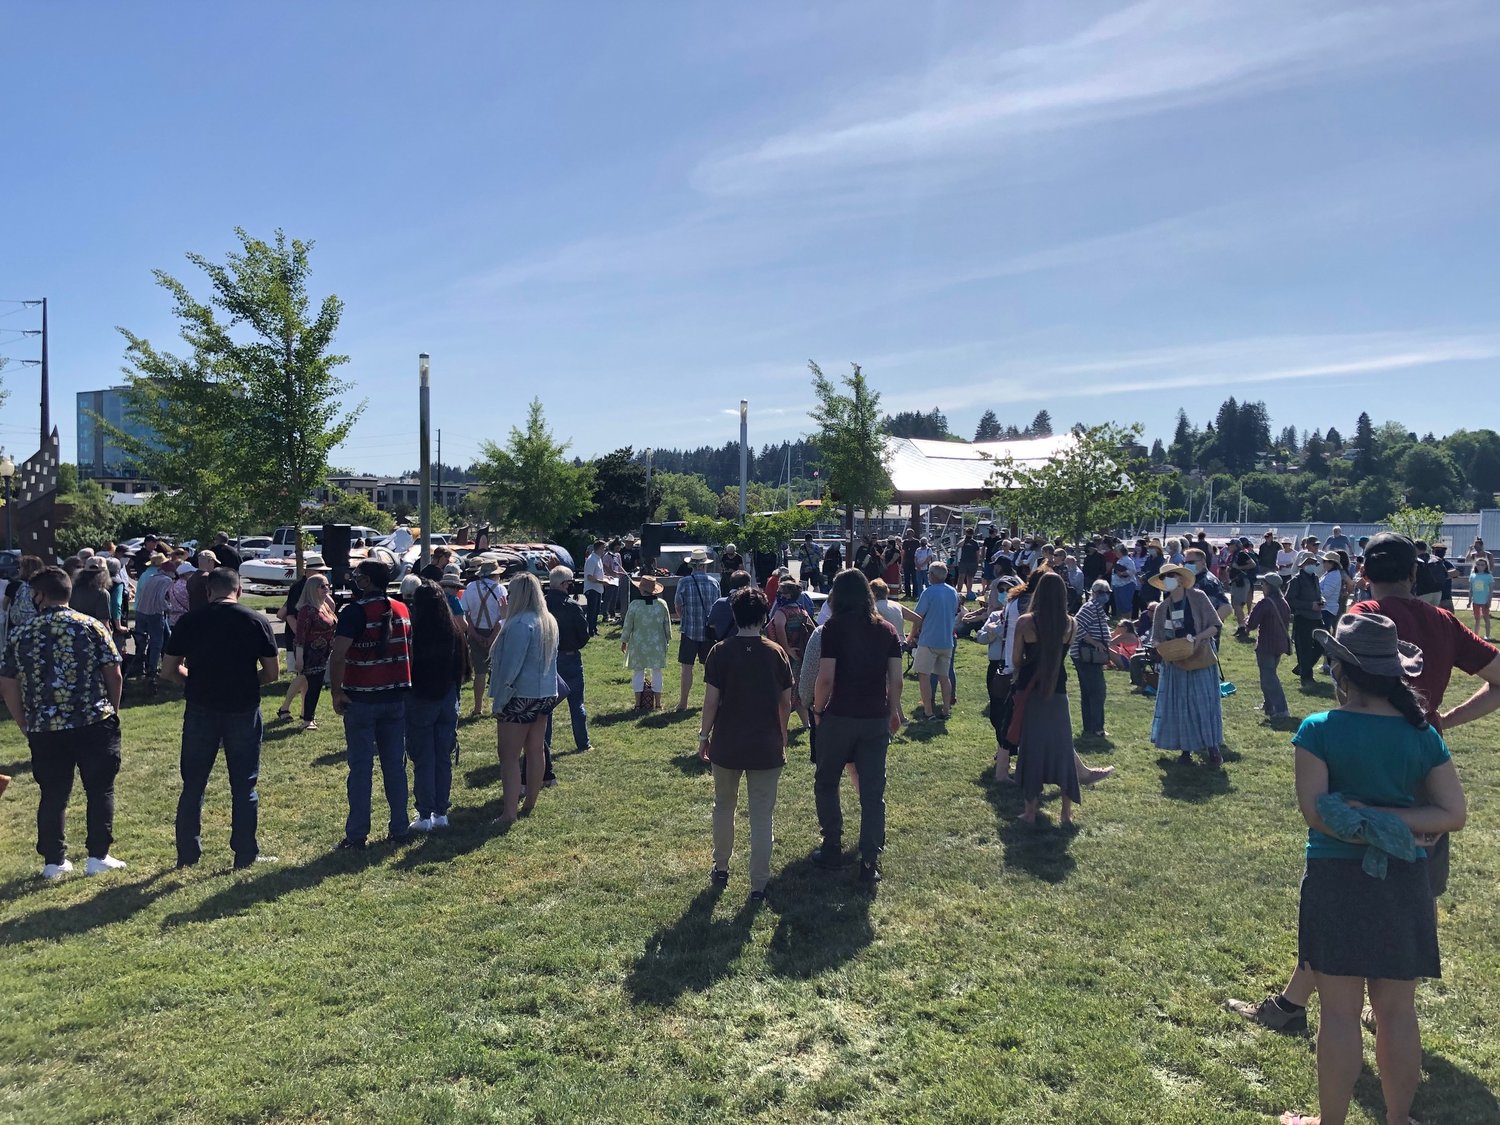 Some 200 people attended a dedication ceremony for The 2021 Red Road to DC Totem Pole Journey to Protect Sacred Sites, in which Lummi Nation carvers will travel across the U.S. to deliver their new totem pole.